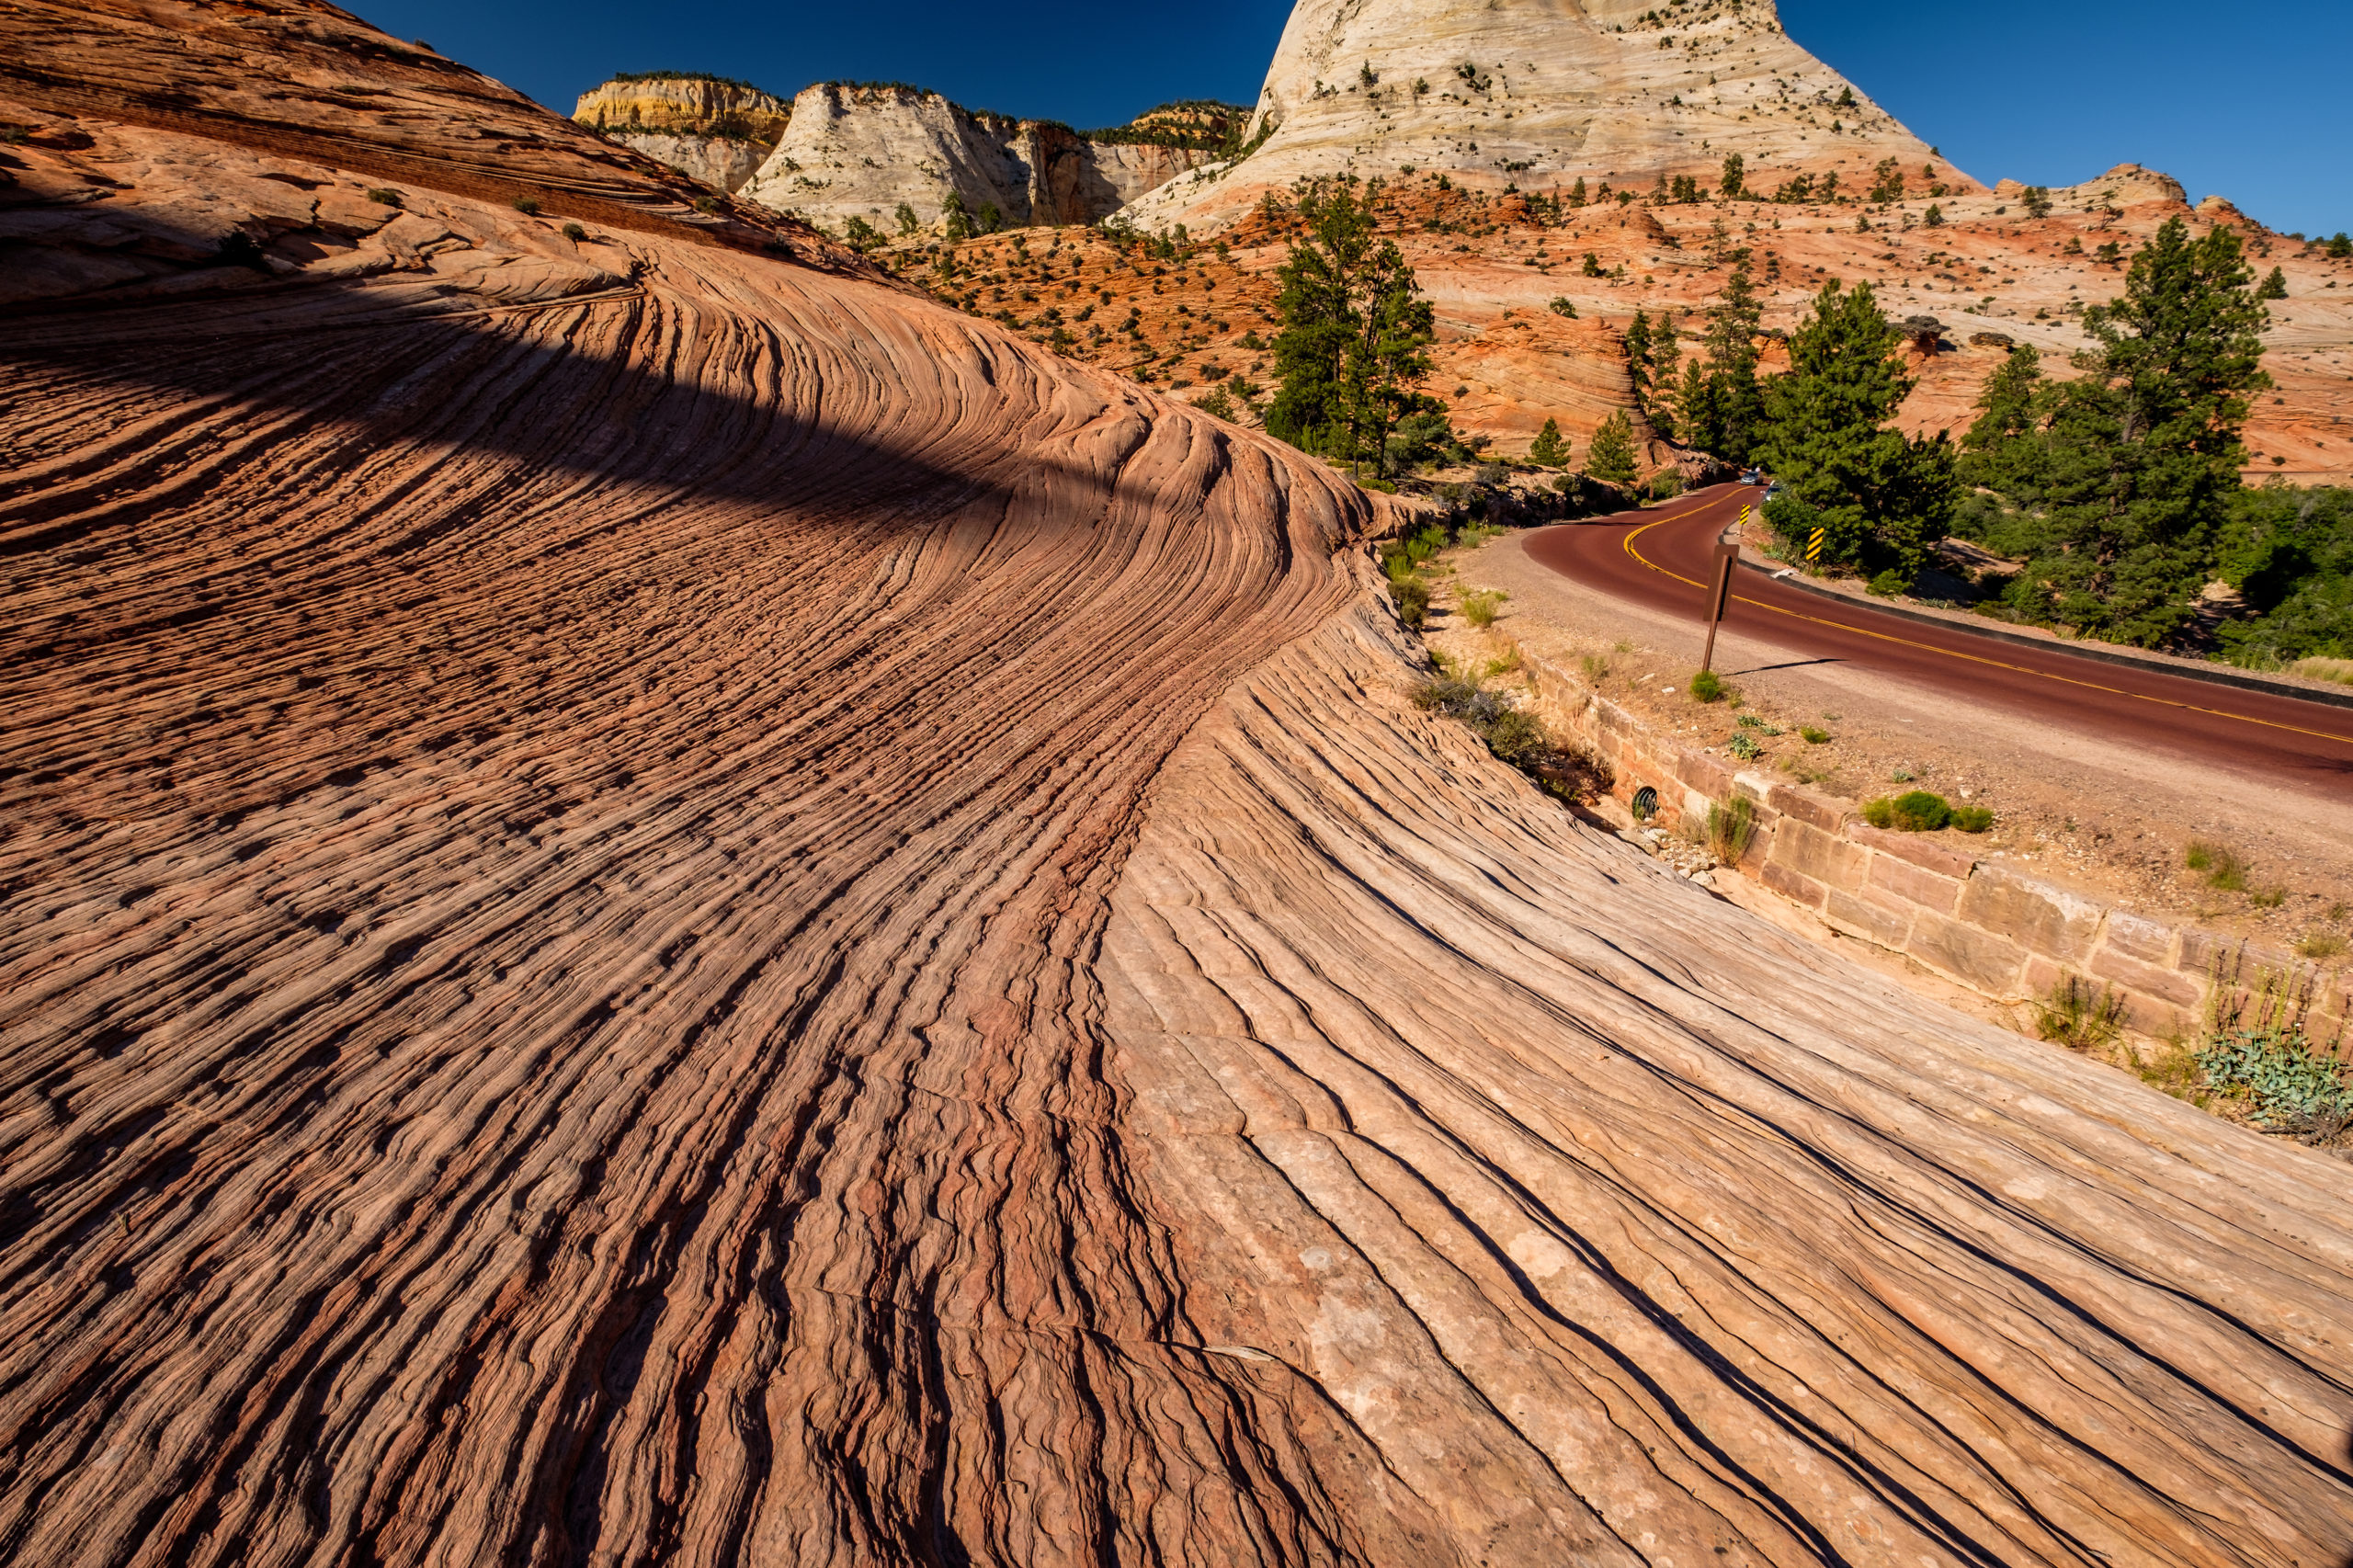 Striated rock formations in Zion National Park